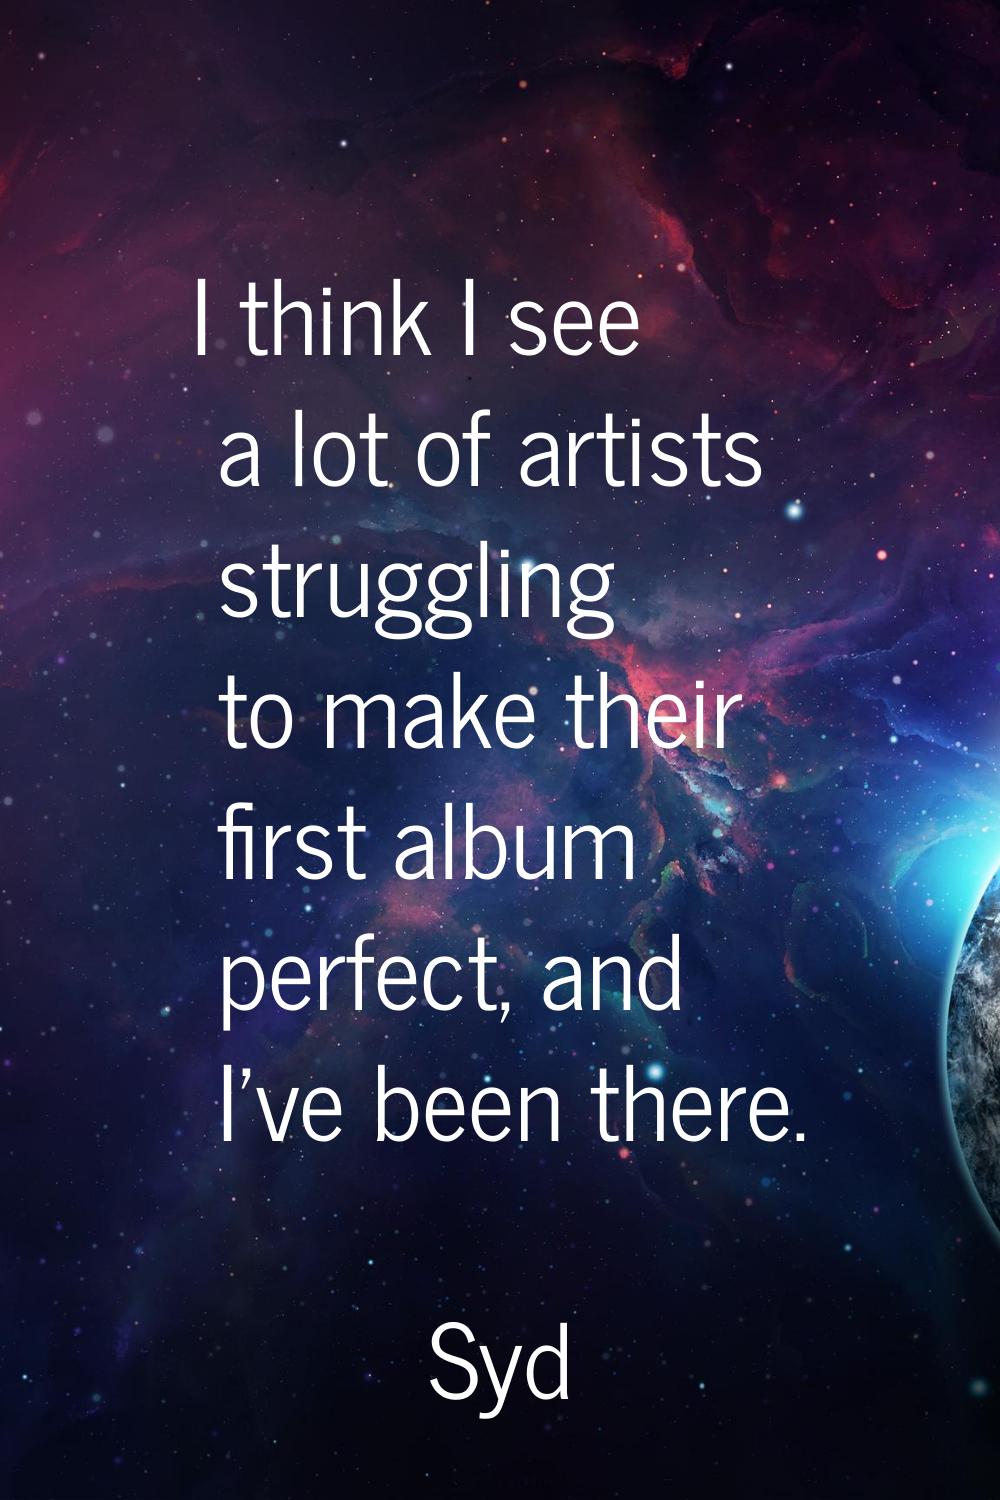 I think I see a lot of artists struggling to make their first album perfect, and I've been there.